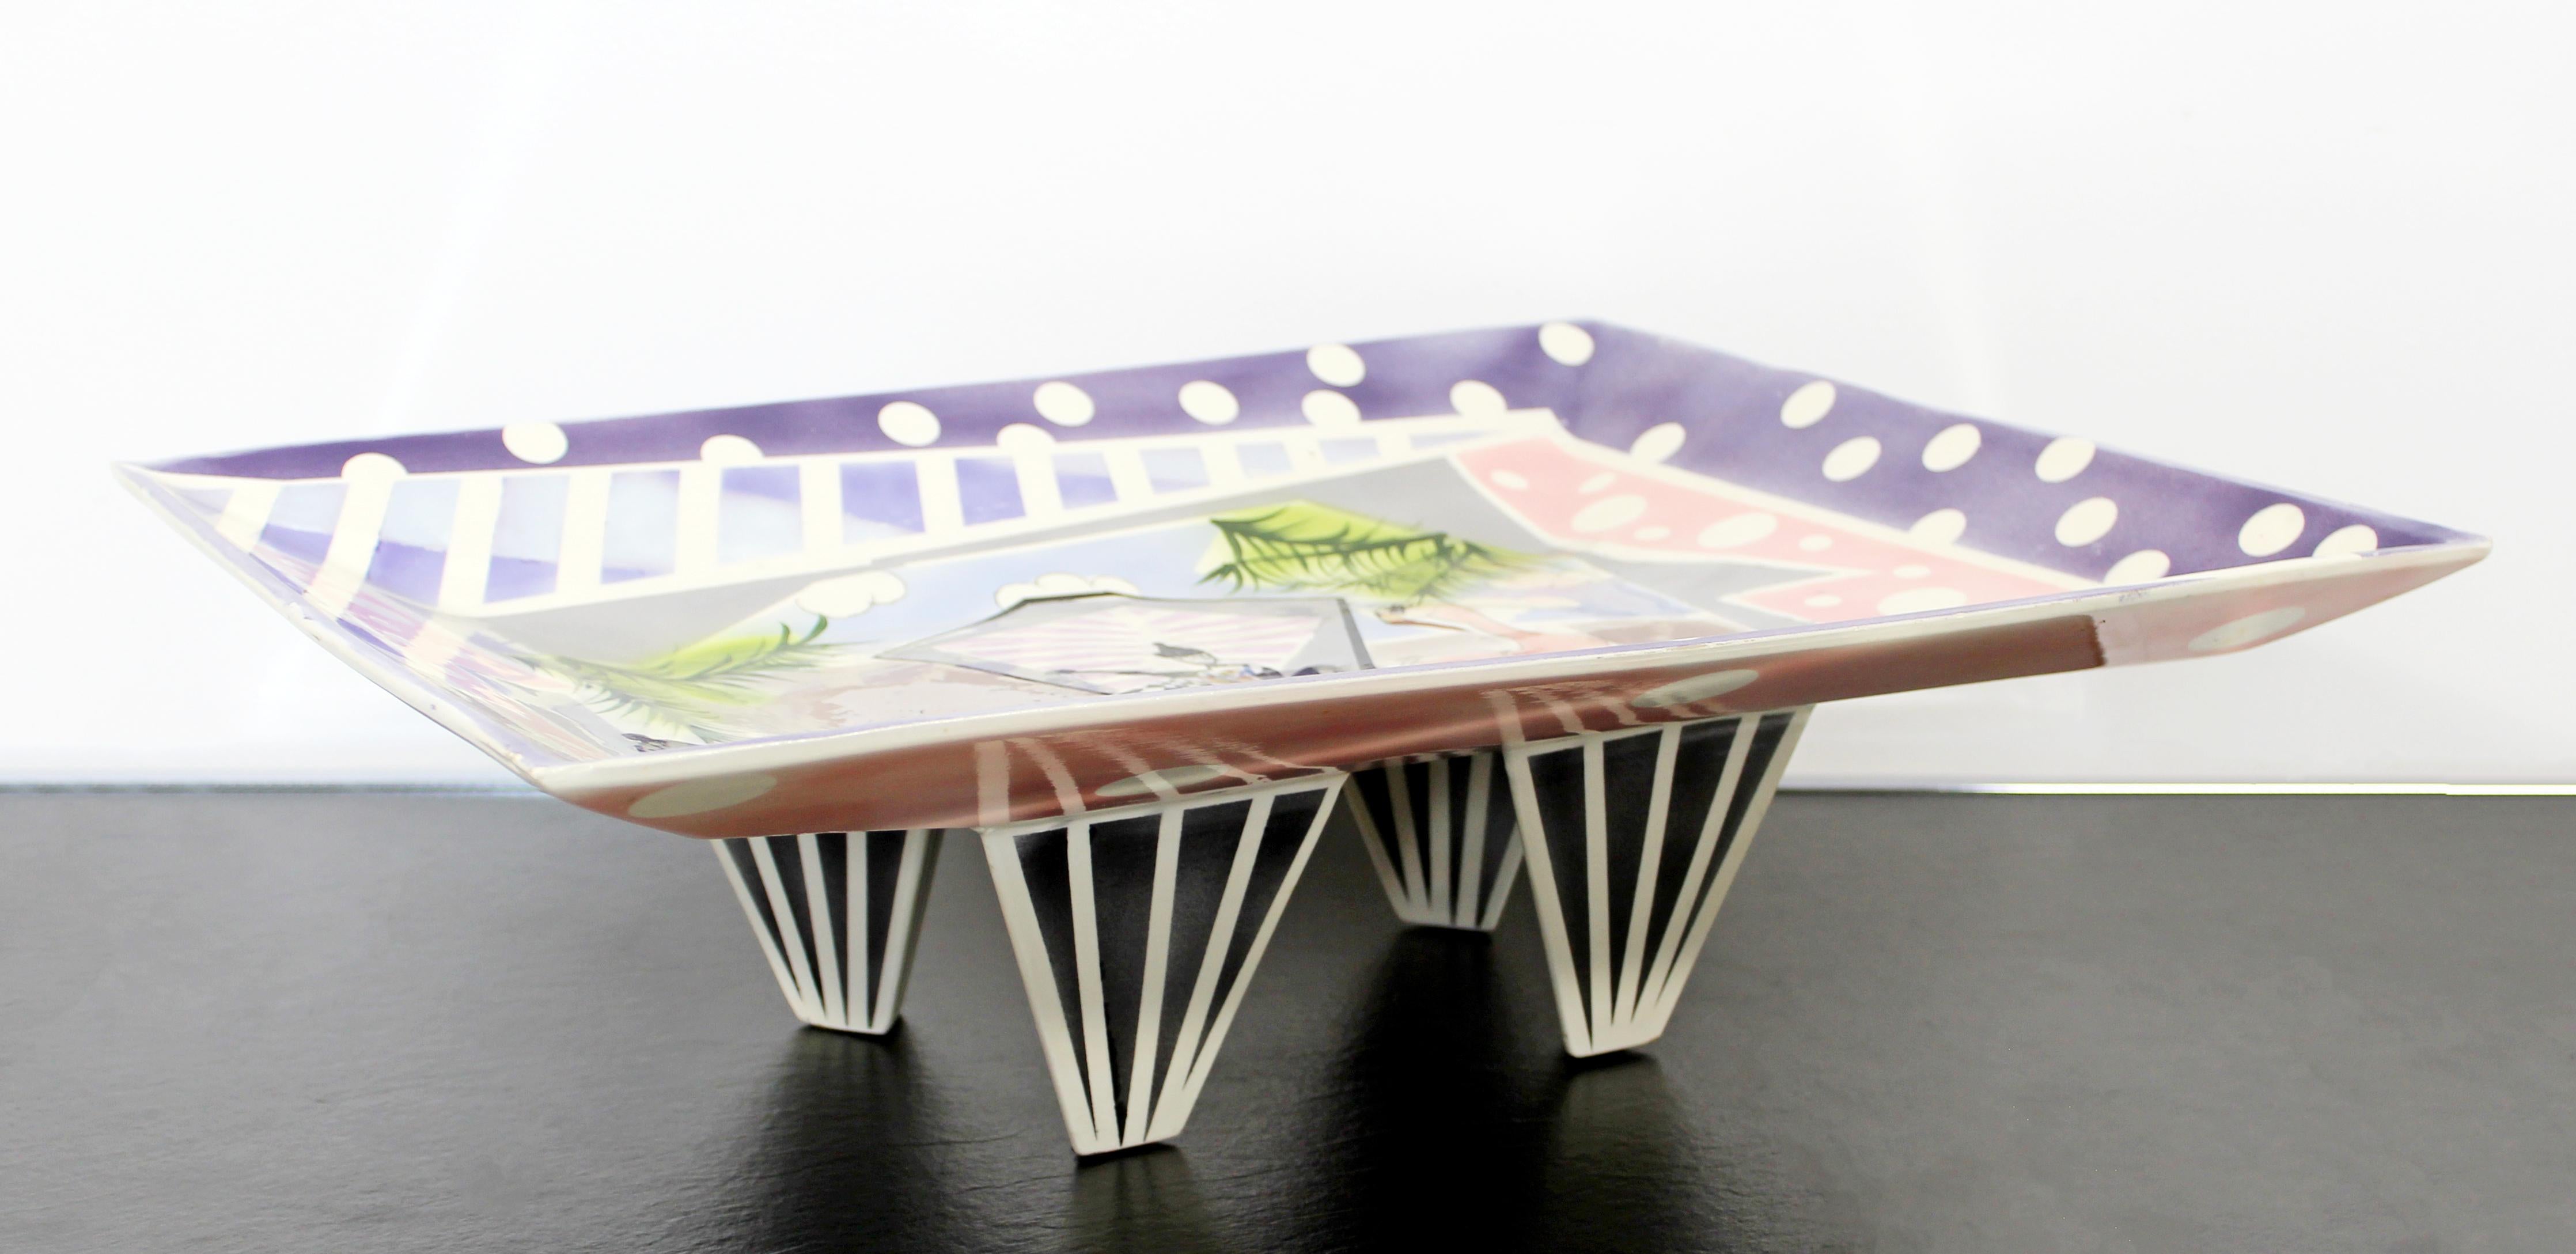 Late 20th Century Contemporary Modern Rike Moss Signed Ceramic Pottery Centerpiece Tray Legs 1980s For Sale